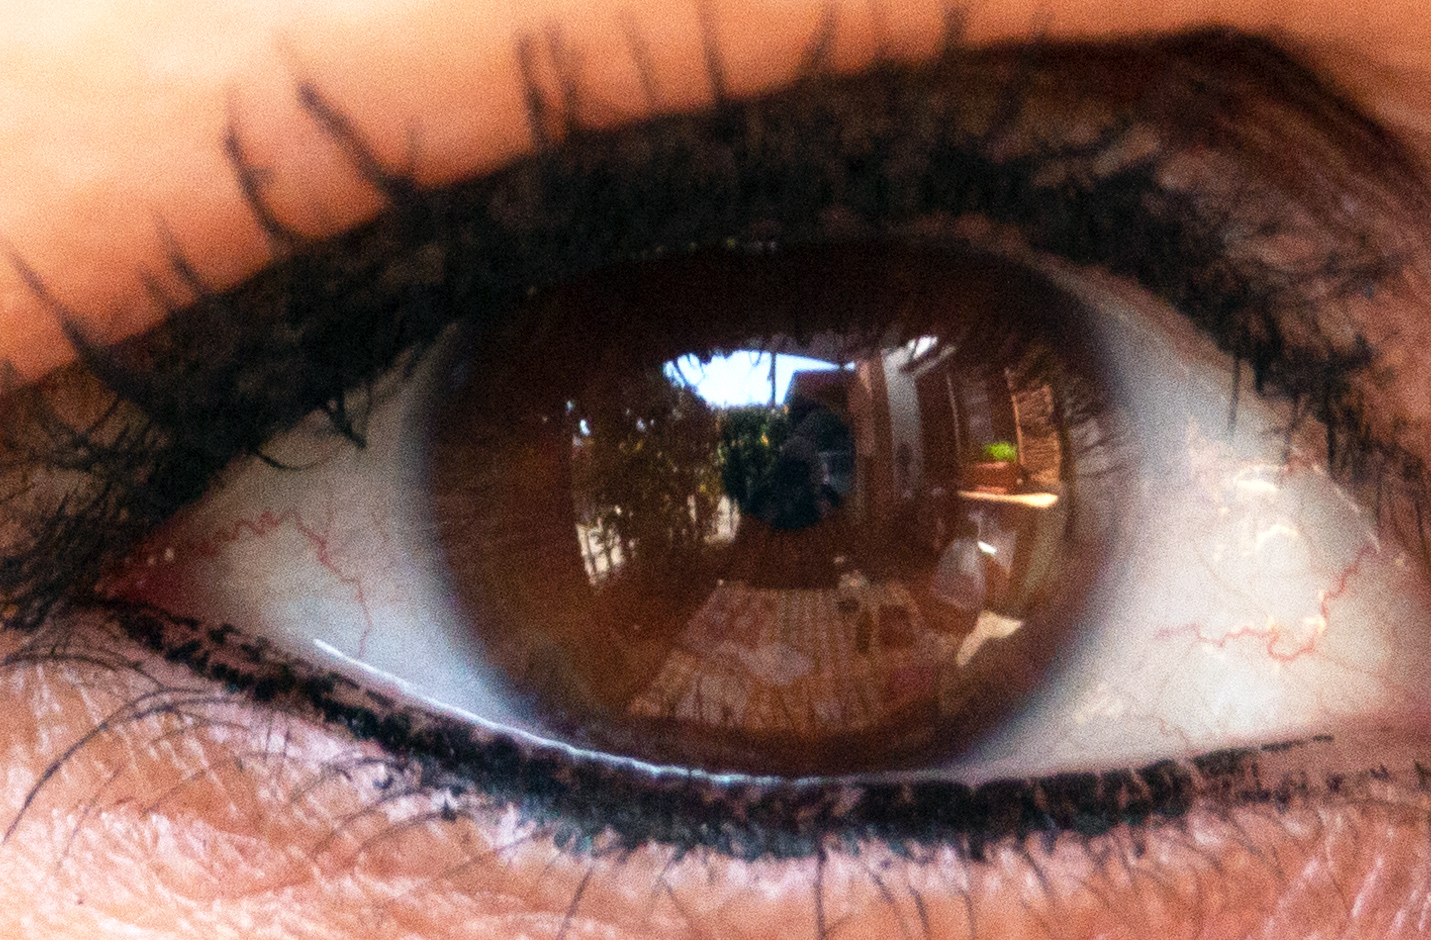 reflection in the eye...